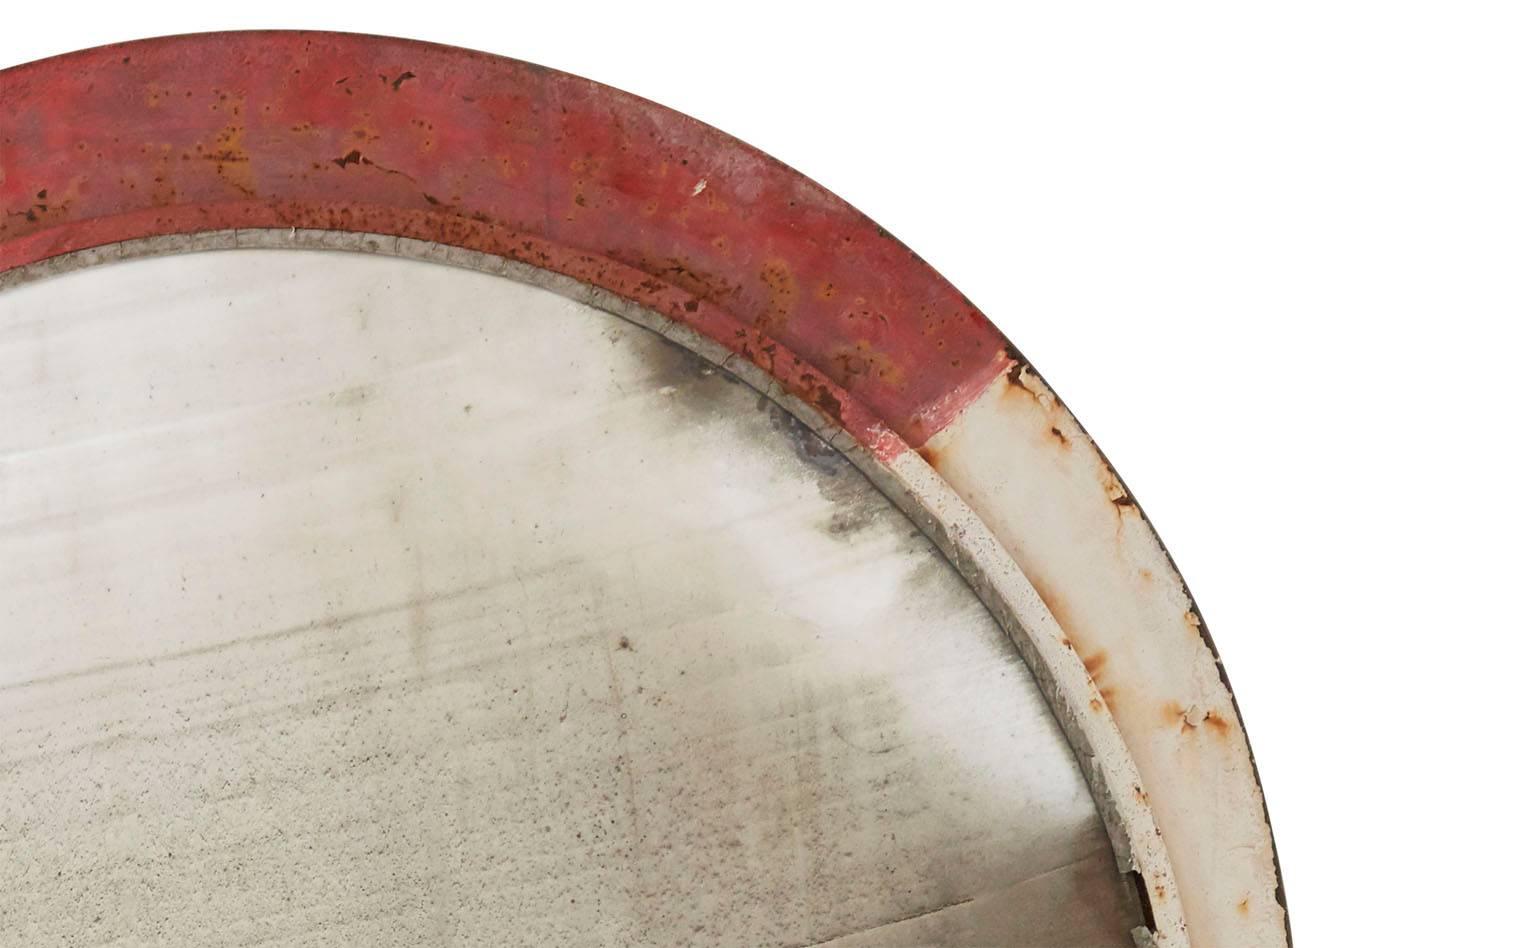 Original convex round mirror.
Iron frame with patinated paint.
Used on winding highway roads,
20th century,
France.
Measures: 54" diameter x 8" D.